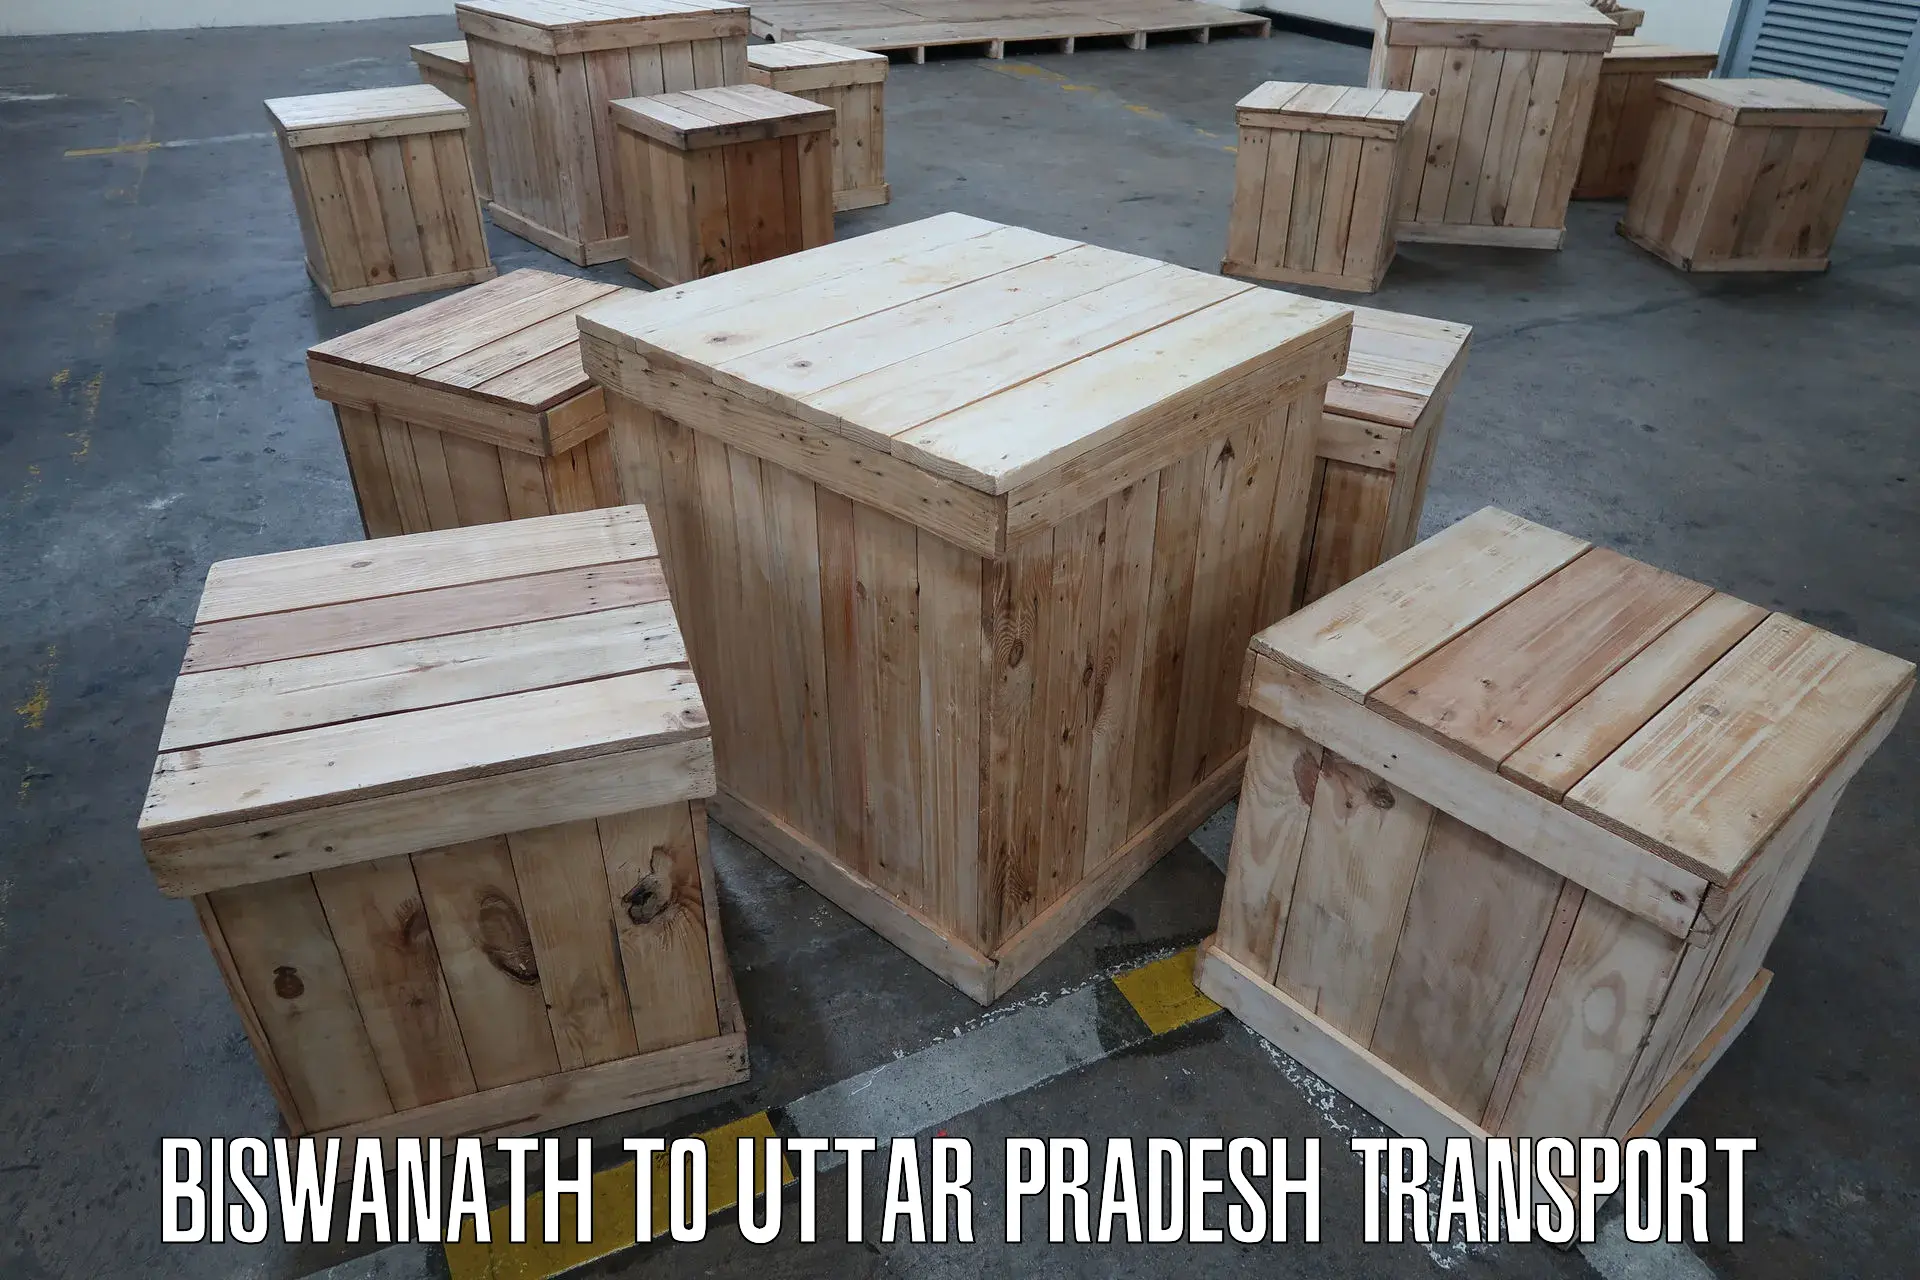 Part load transport service in India Biswanath to Manda